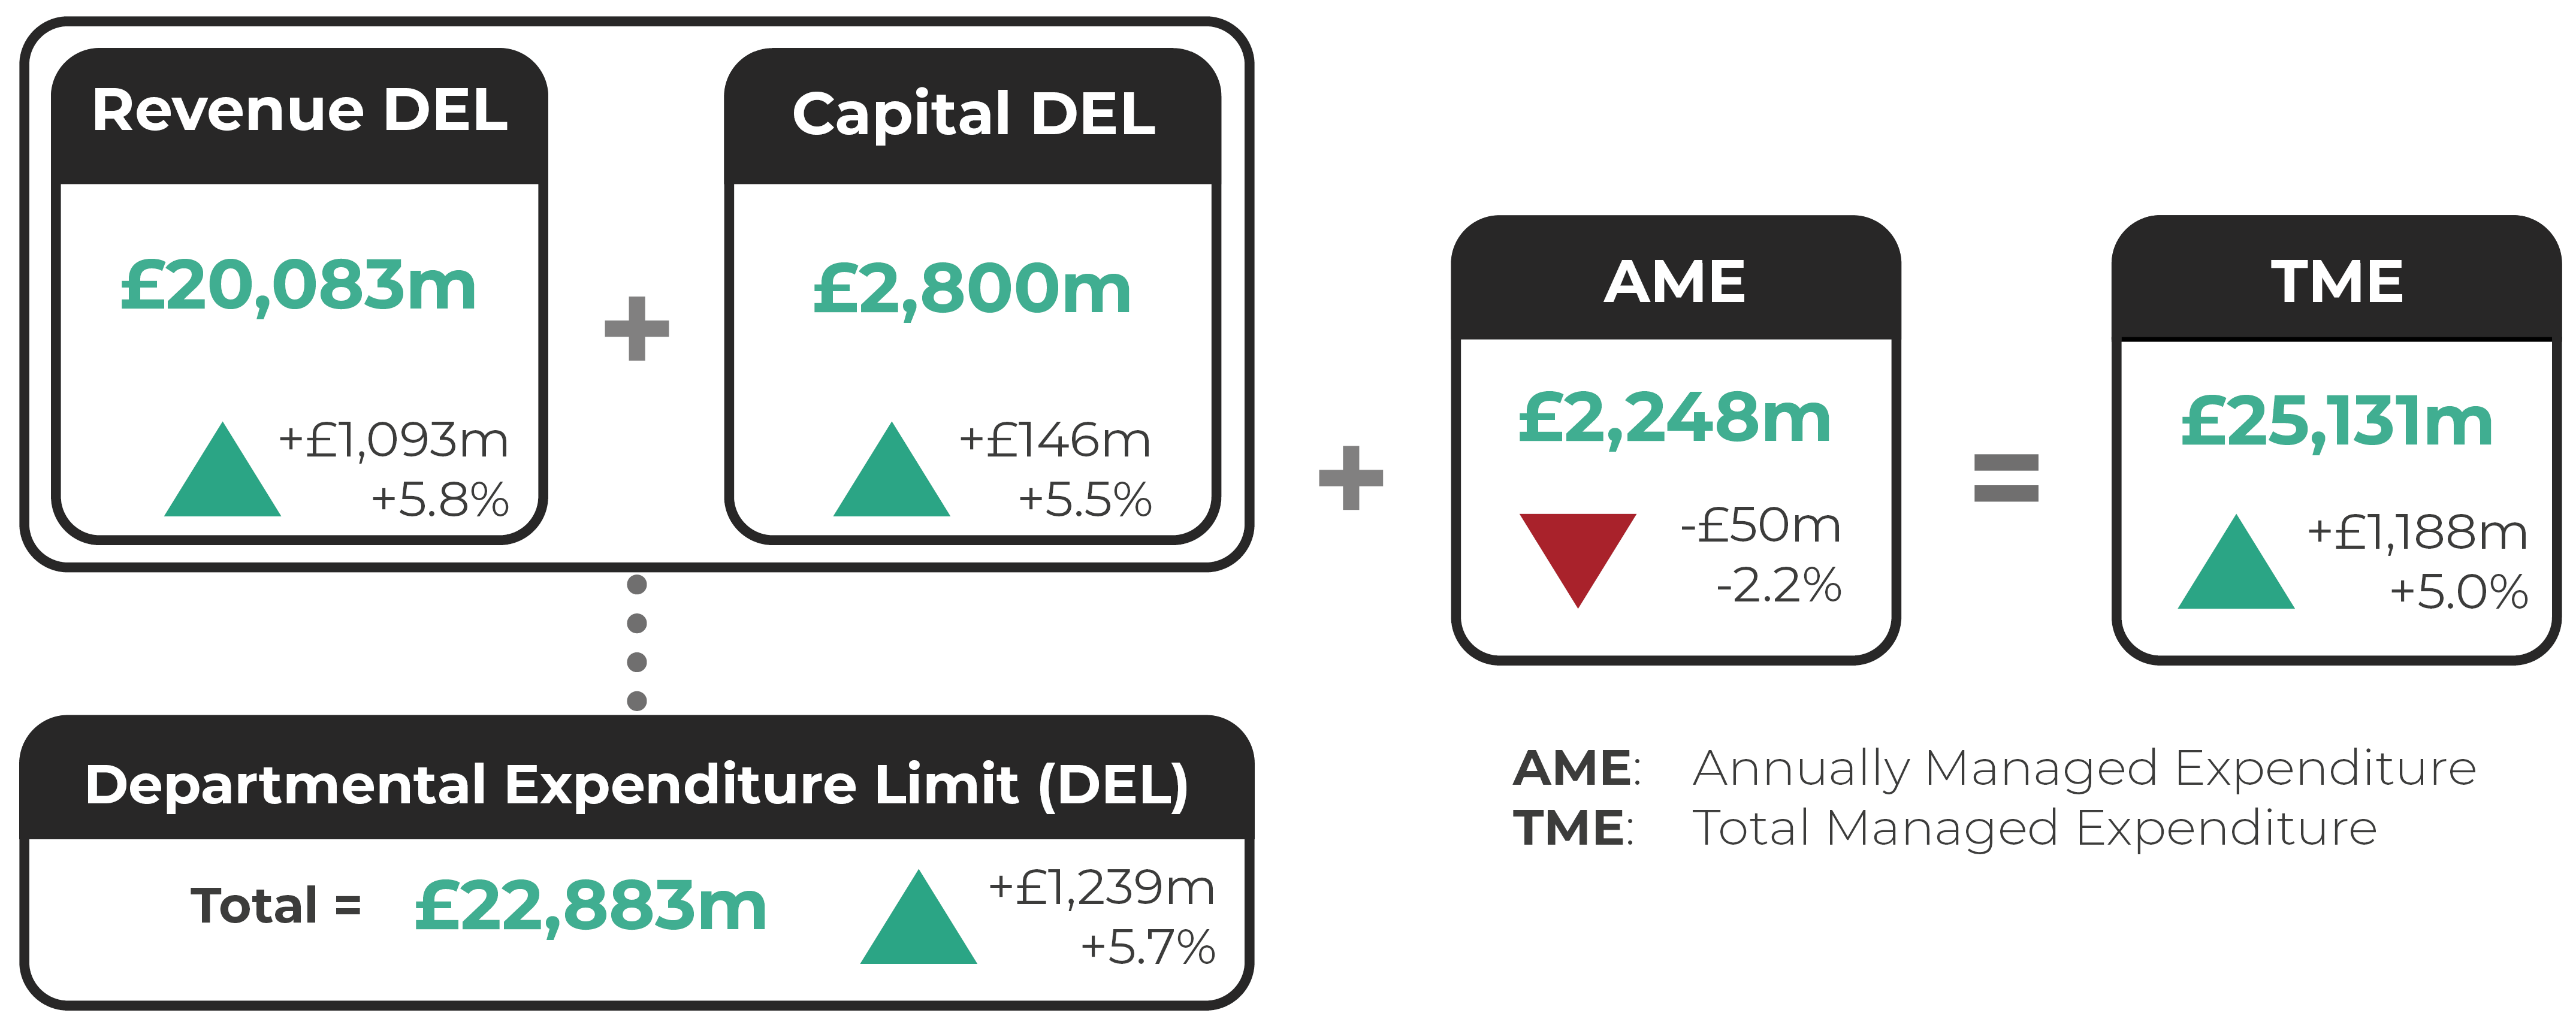 Revenue Departmental Expenditure Limit (DEL): £20,083m (up by £1,093m or 5.8%). Capital DEL: £2,800m (up by £146m or 5.5%). Total DEL: £22,883m (up by £1,239m or 5.7%). Annually Managed Expenditure (AME): £2,248m (down by £50m or -2.2%). Total Managed Expenditure (TME): £25,131m (up by £1,188m or 5.0%).